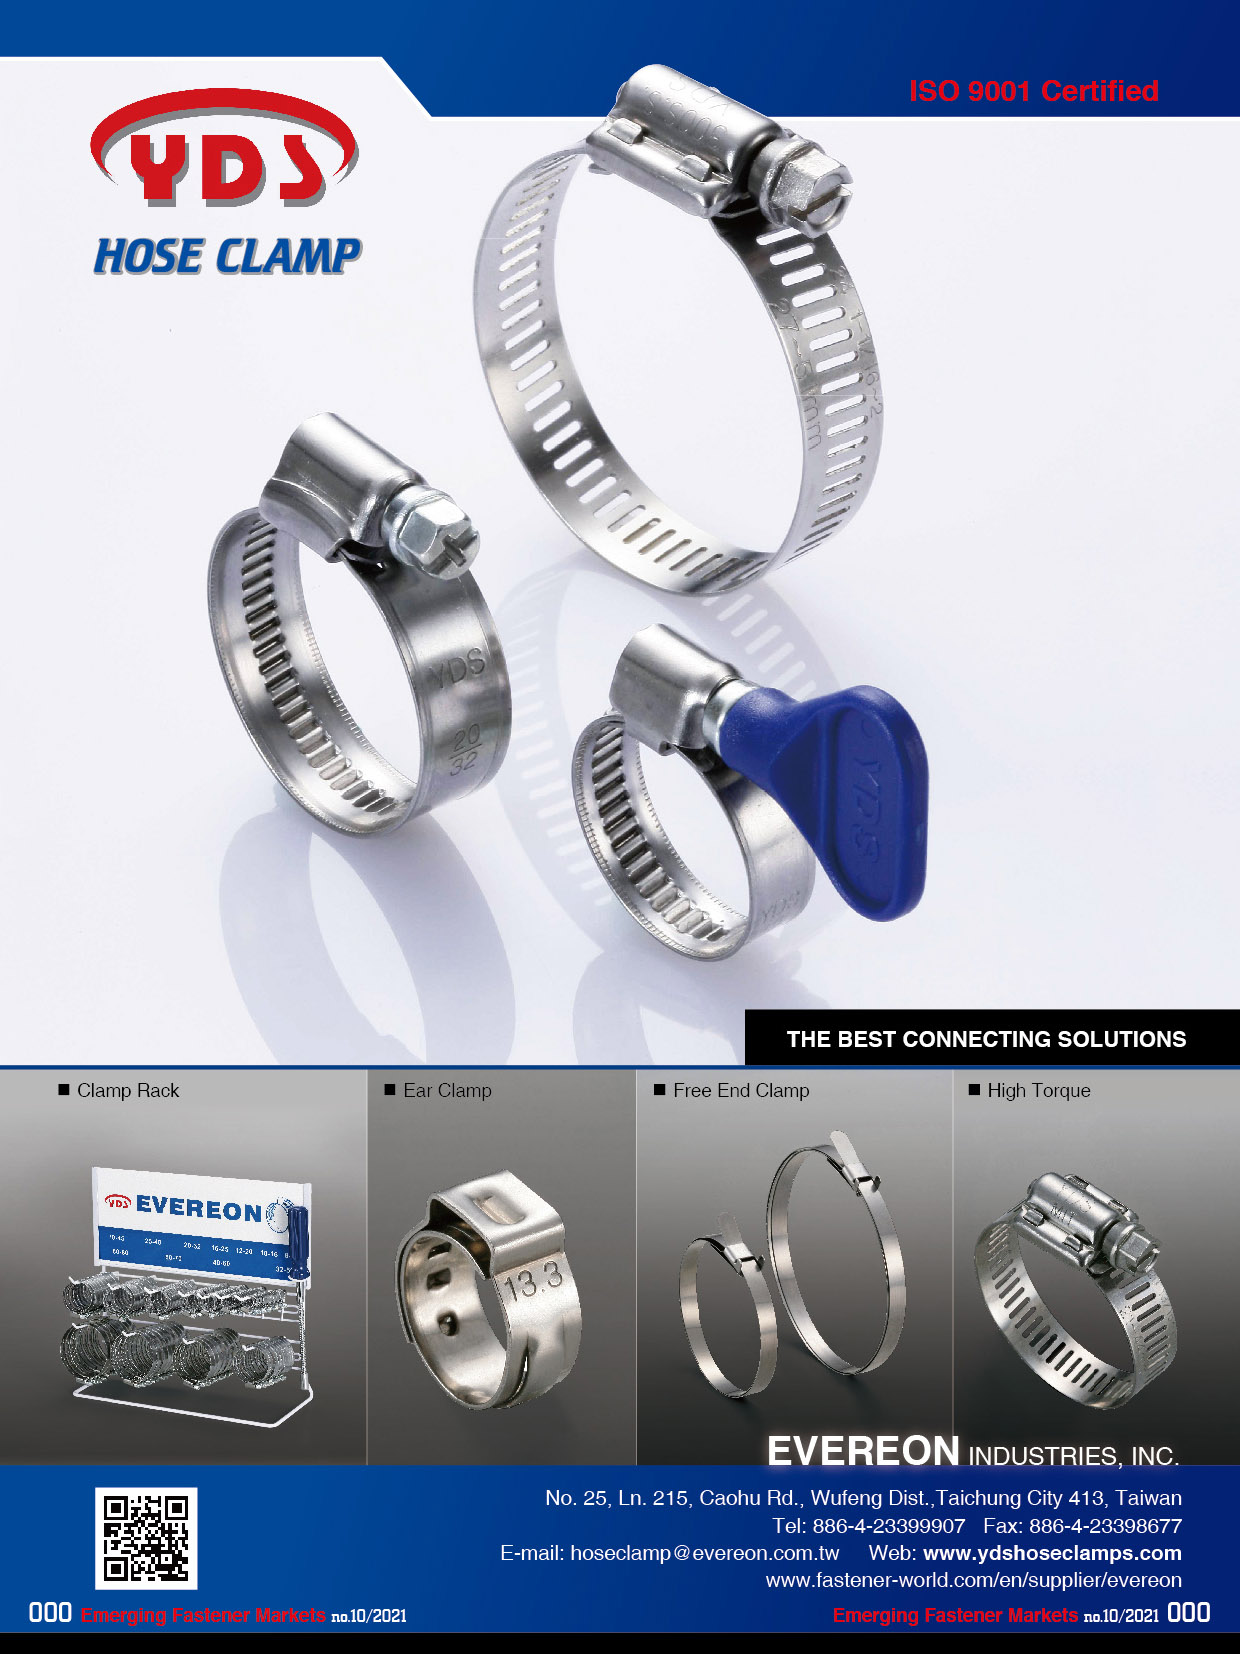 EVEREON INDUSTRIES, INC. , Hose Clamp, Clamp Rack, Ear Clamp, Free End Clamp, High Torque